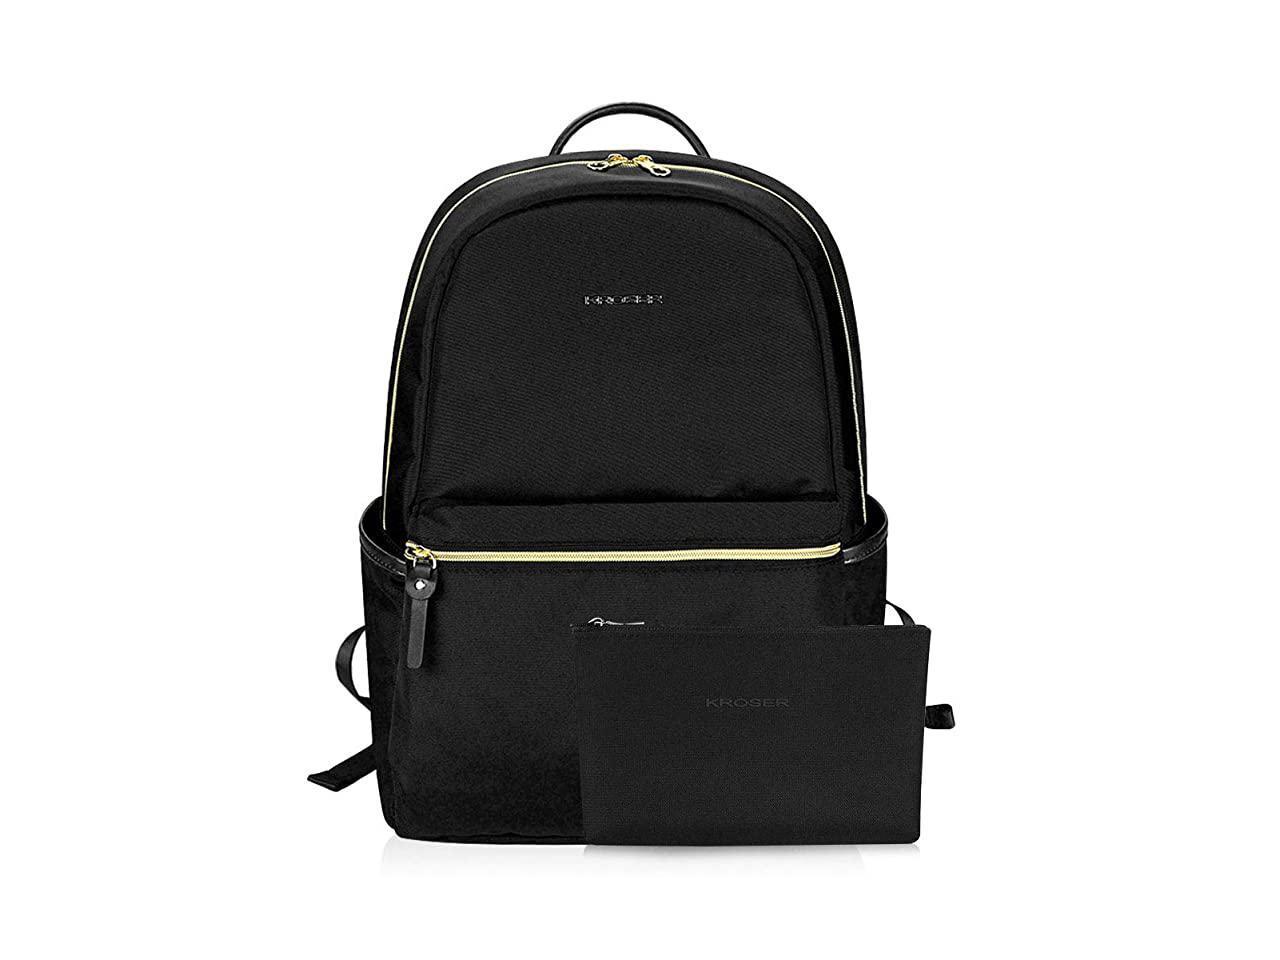 College Bag Computer with USB Charging Port Backpacks Mens and Womens Travel Laptop Business Casual 15.6 inch Laptop,Black 